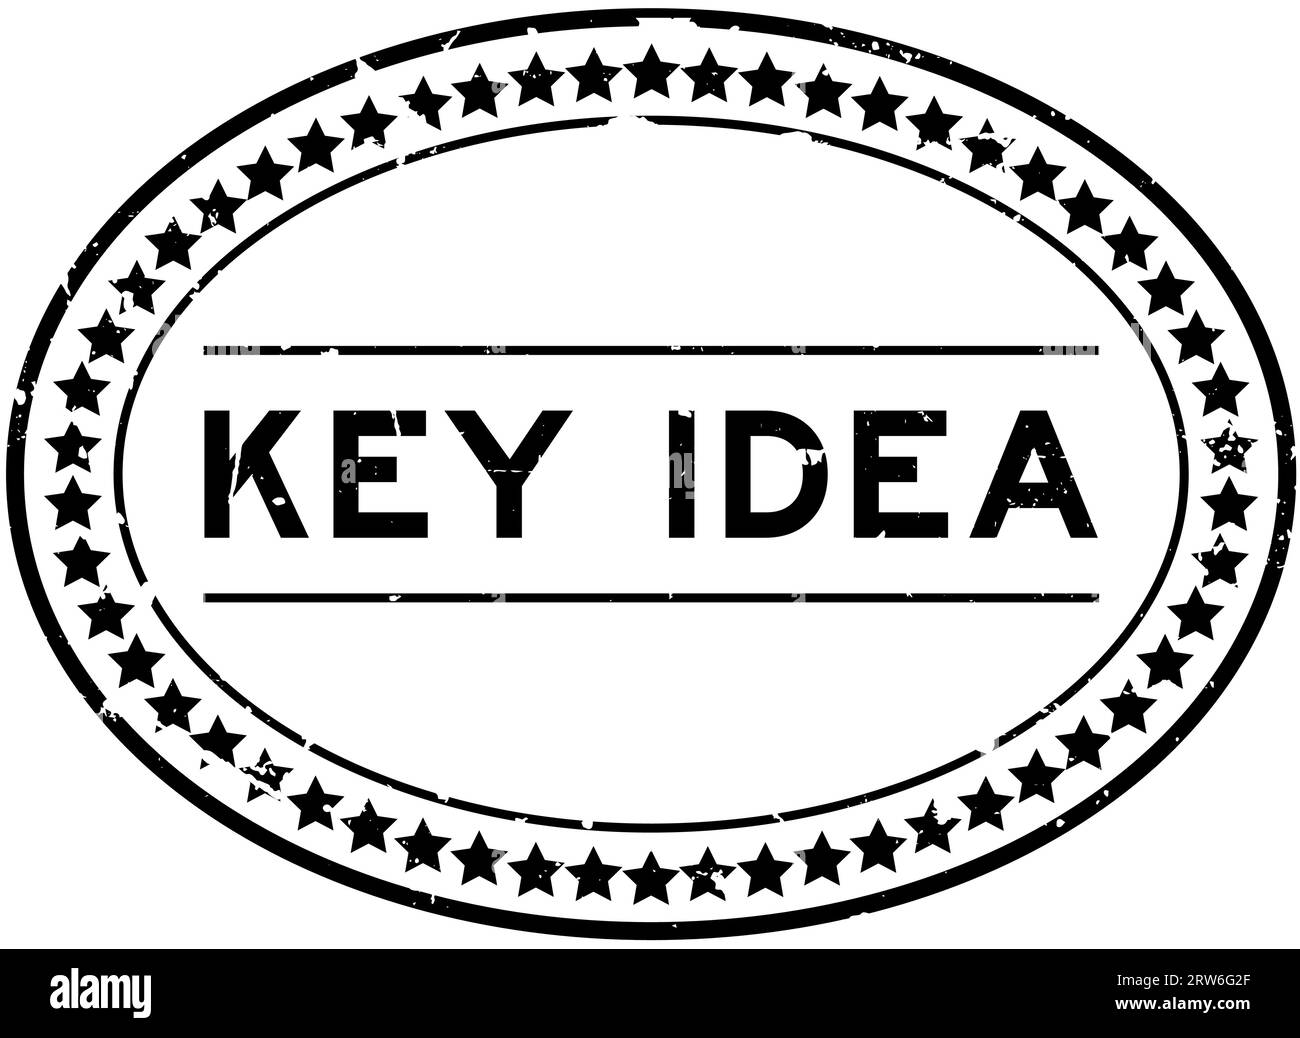 Grunge black key idea word oval rubber seal stamp on white background Stock Vector